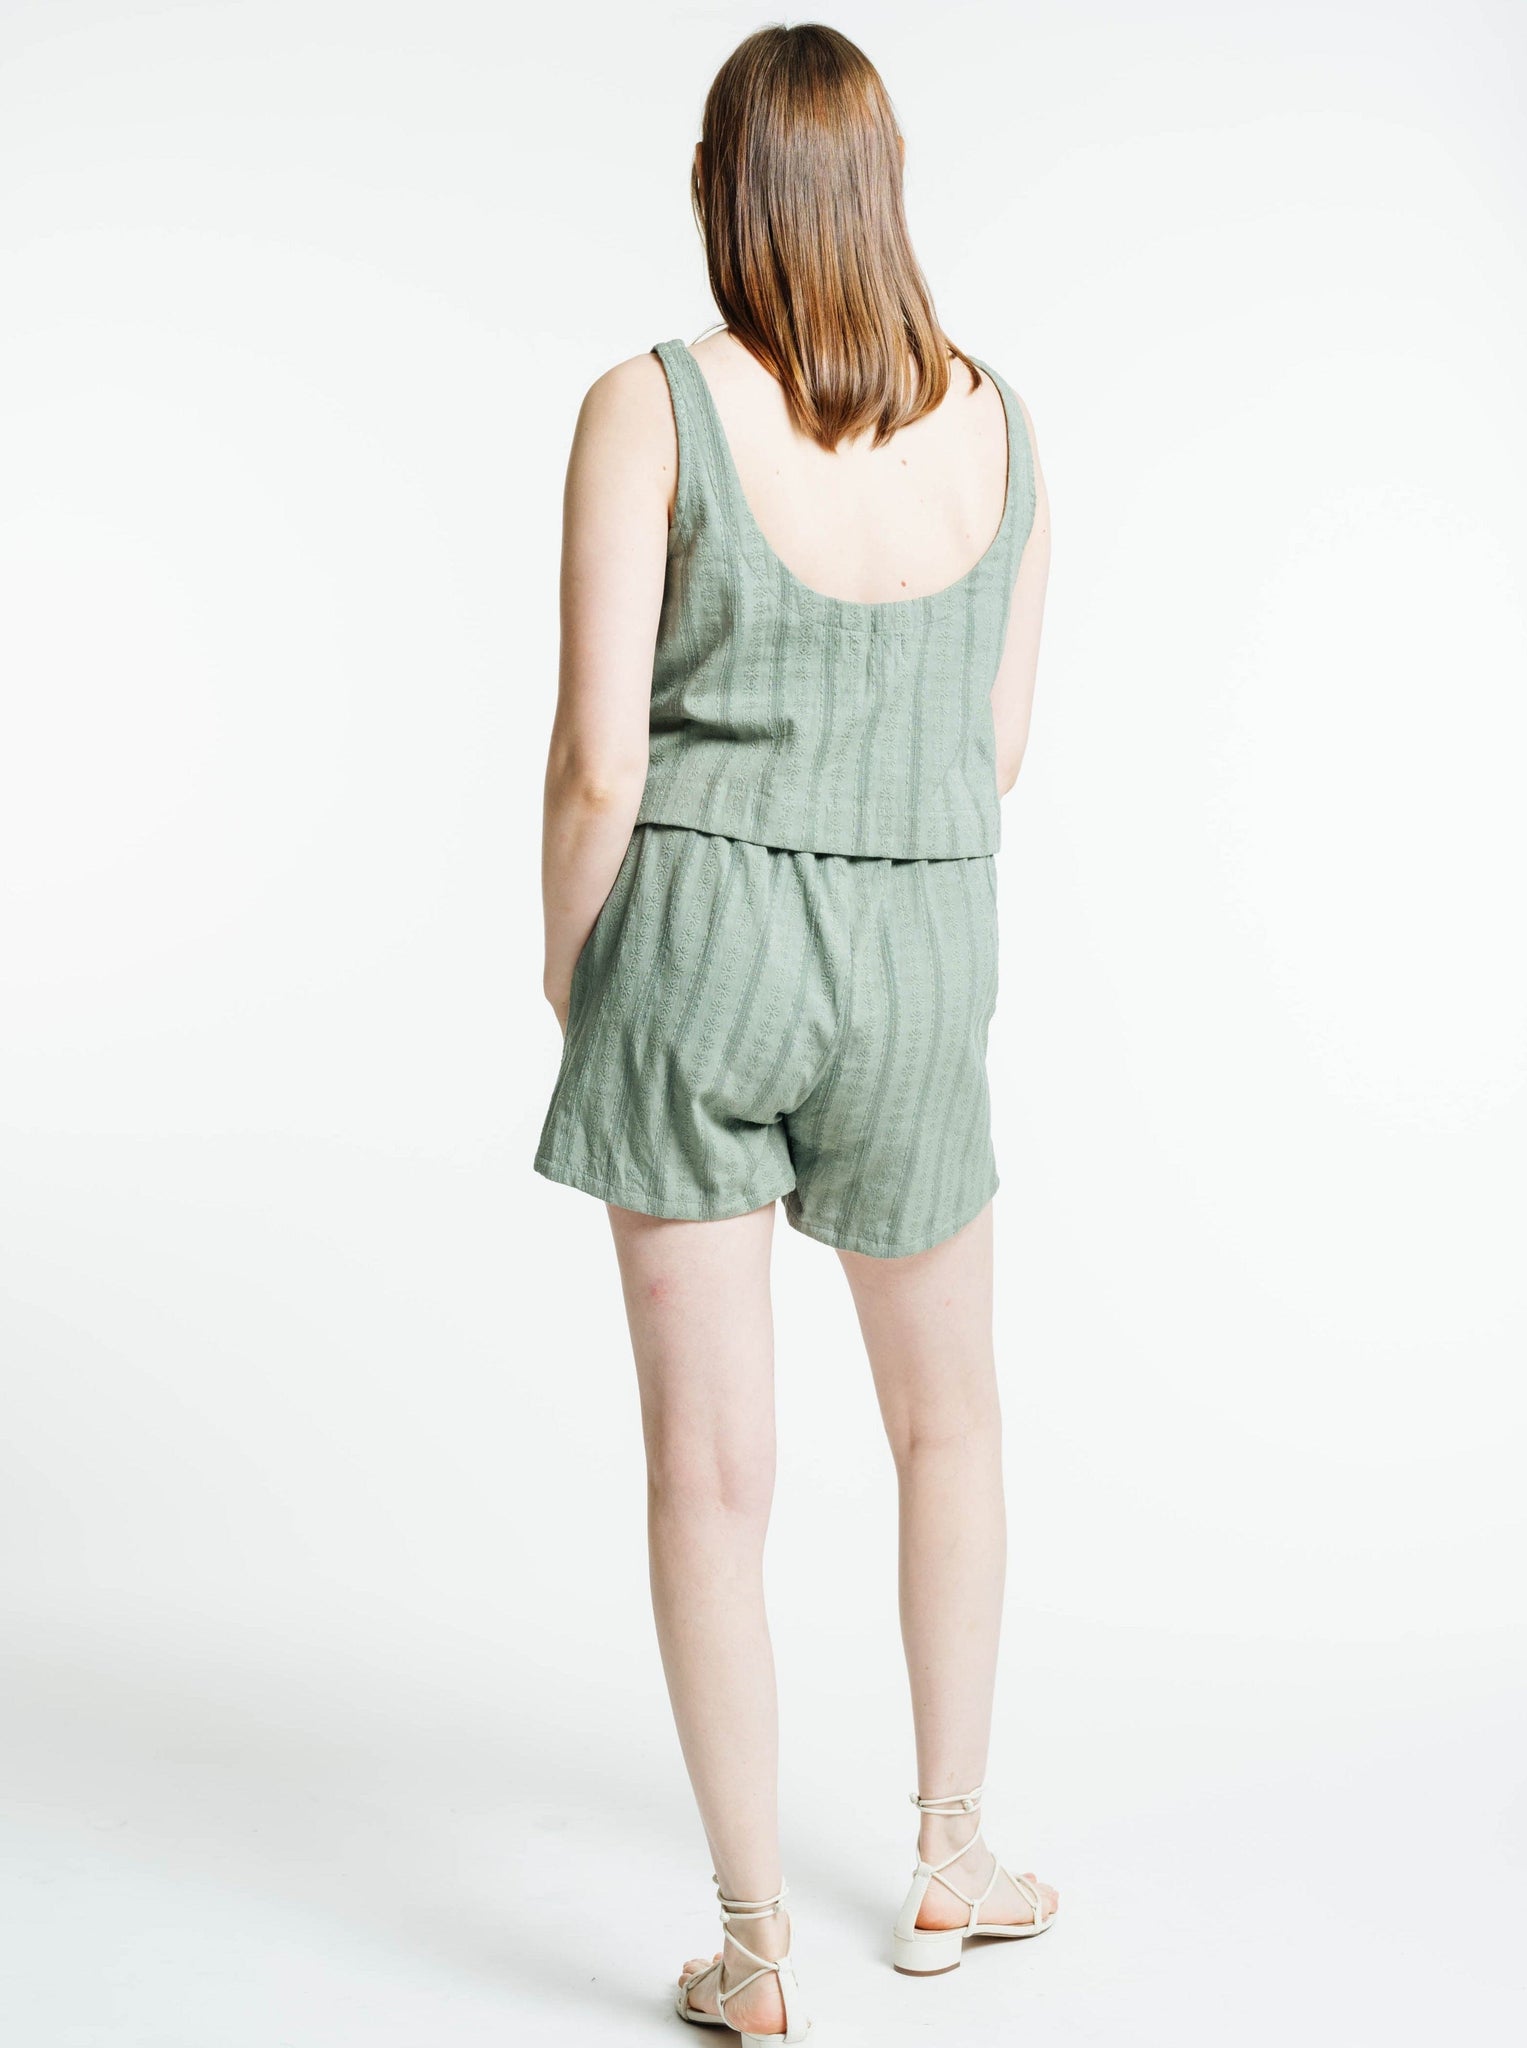 The back view of a woman wearing a Market Tank - Azure Broderie, creating a monochromatic look.